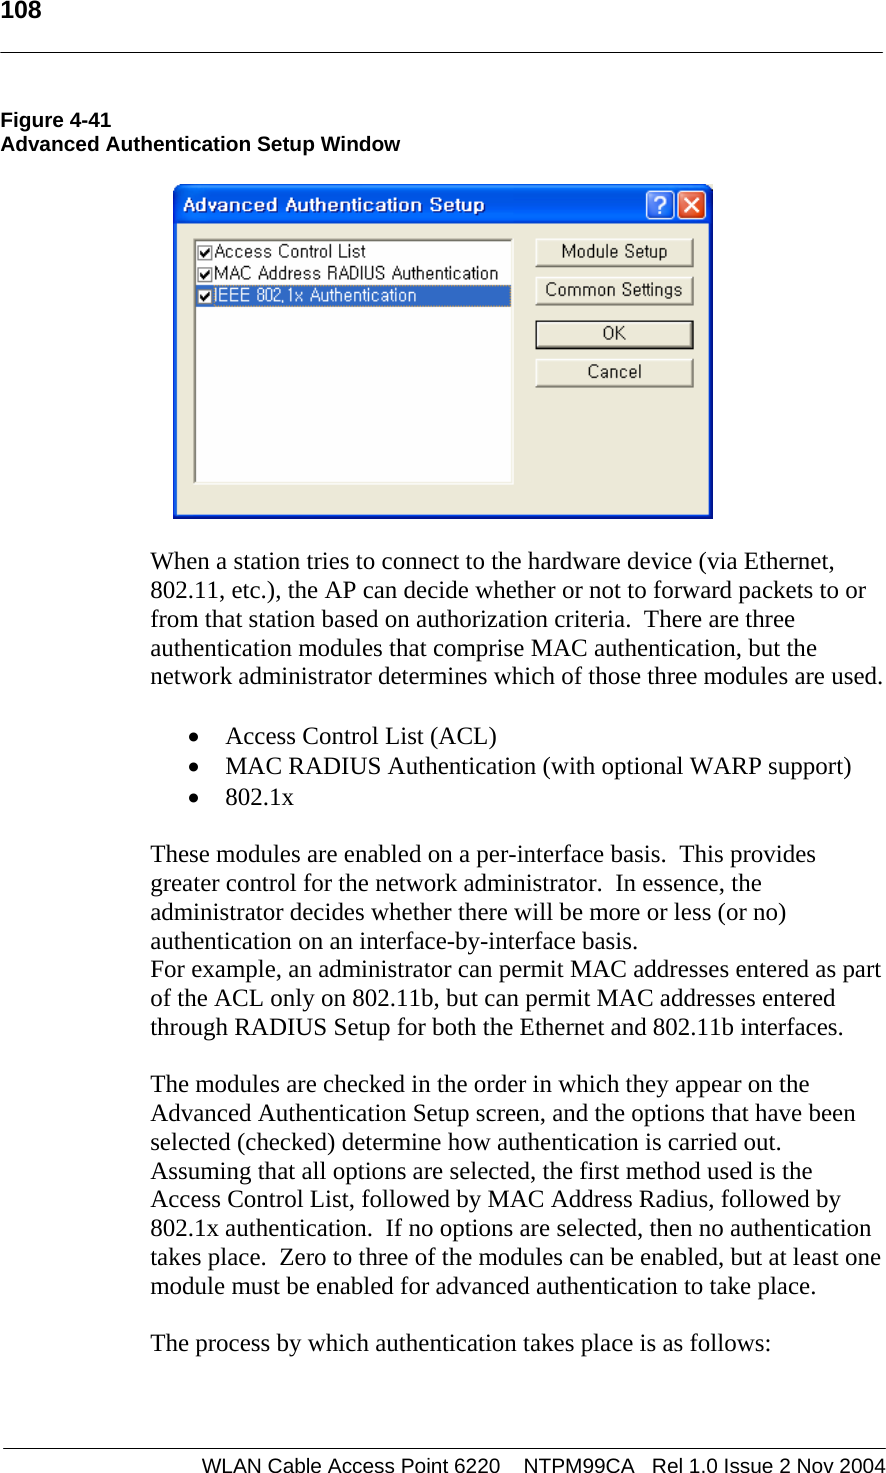   108  WLAN Cable Access Point 6220    NTPM99CA   Rel 1.0 Issue 2 Nov 2004 Figure 4-41 Advanced Authentication Setup Window    When a station tries to connect to the hardware device (via Ethernet, 802.11, etc.), the AP can decide whether or not to forward packets to or from that station based on authorization criteria.  There are three authentication modules that comprise MAC authentication, but the network administrator determines which of those three modules are used.   • Access Control List (ACL) • MAC RADIUS Authentication (with optional WARP support) • 802.1x  These modules are enabled on a per-interface basis.  This provides greater control for the network administrator.  In essence, the administrator decides whether there will be more or less (or no) authentication on an interface-by-interface basis.  For example, an administrator can permit MAC addresses entered as part of the ACL only on 802.11b, but can permit MAC addresses entered through RADIUS Setup for both the Ethernet and 802.11b interfaces.  The modules are checked in the order in which they appear on the Advanced Authentication Setup screen, and the options that have been selected (checked) determine how authentication is carried out.  Assuming that all options are selected, the first method used is the Access Control List, followed by MAC Address Radius, followed by 802.1x authentication.  If no options are selected, then no authentication takes place.  Zero to three of the modules can be enabled, but at least one module must be enabled for advanced authentication to take place.  The process by which authentication takes place is as follows:  